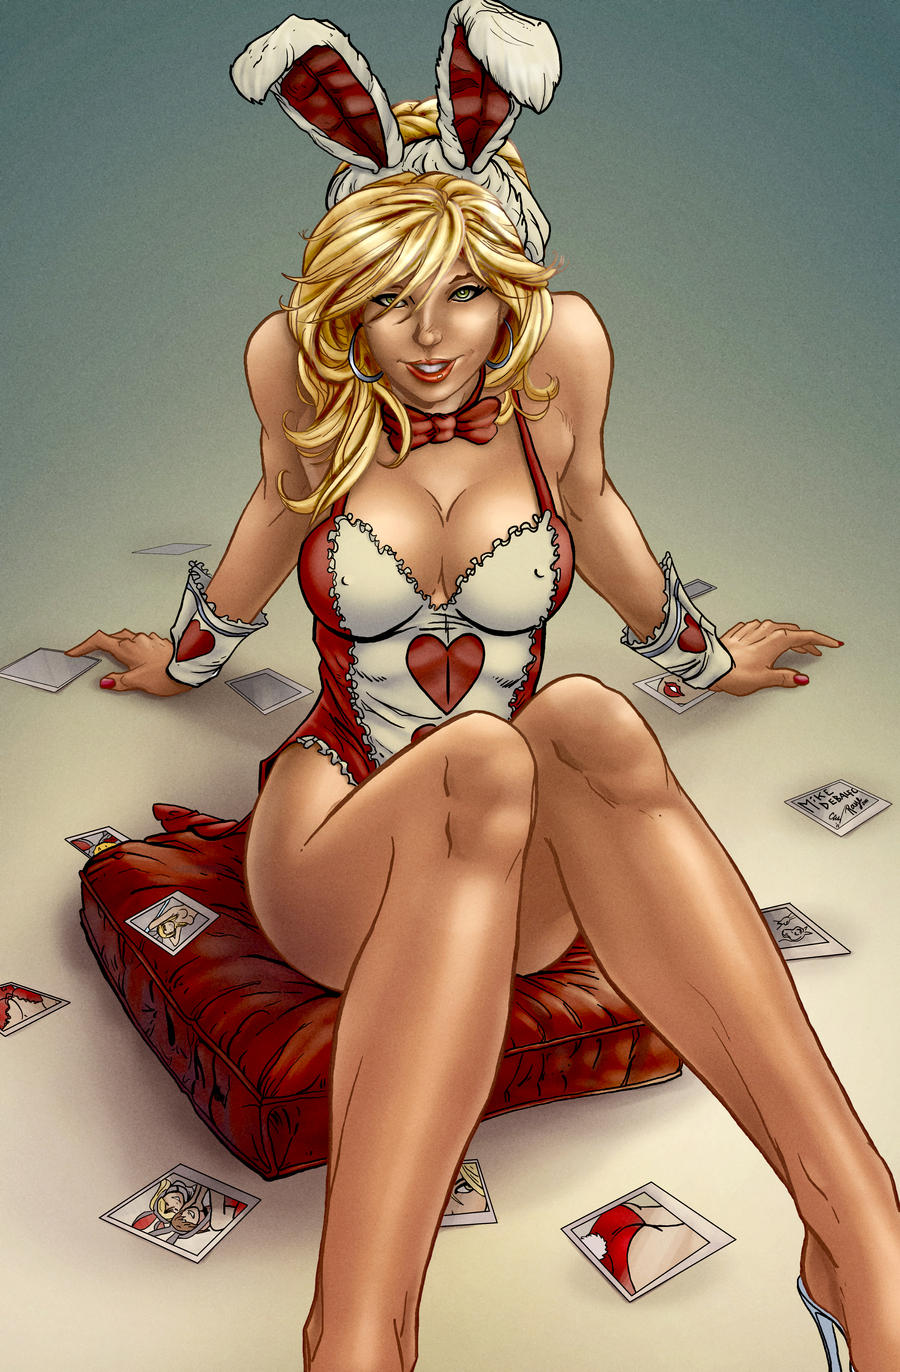 1000 Images About Modern Pin Up Art On Pinterest Pin Up